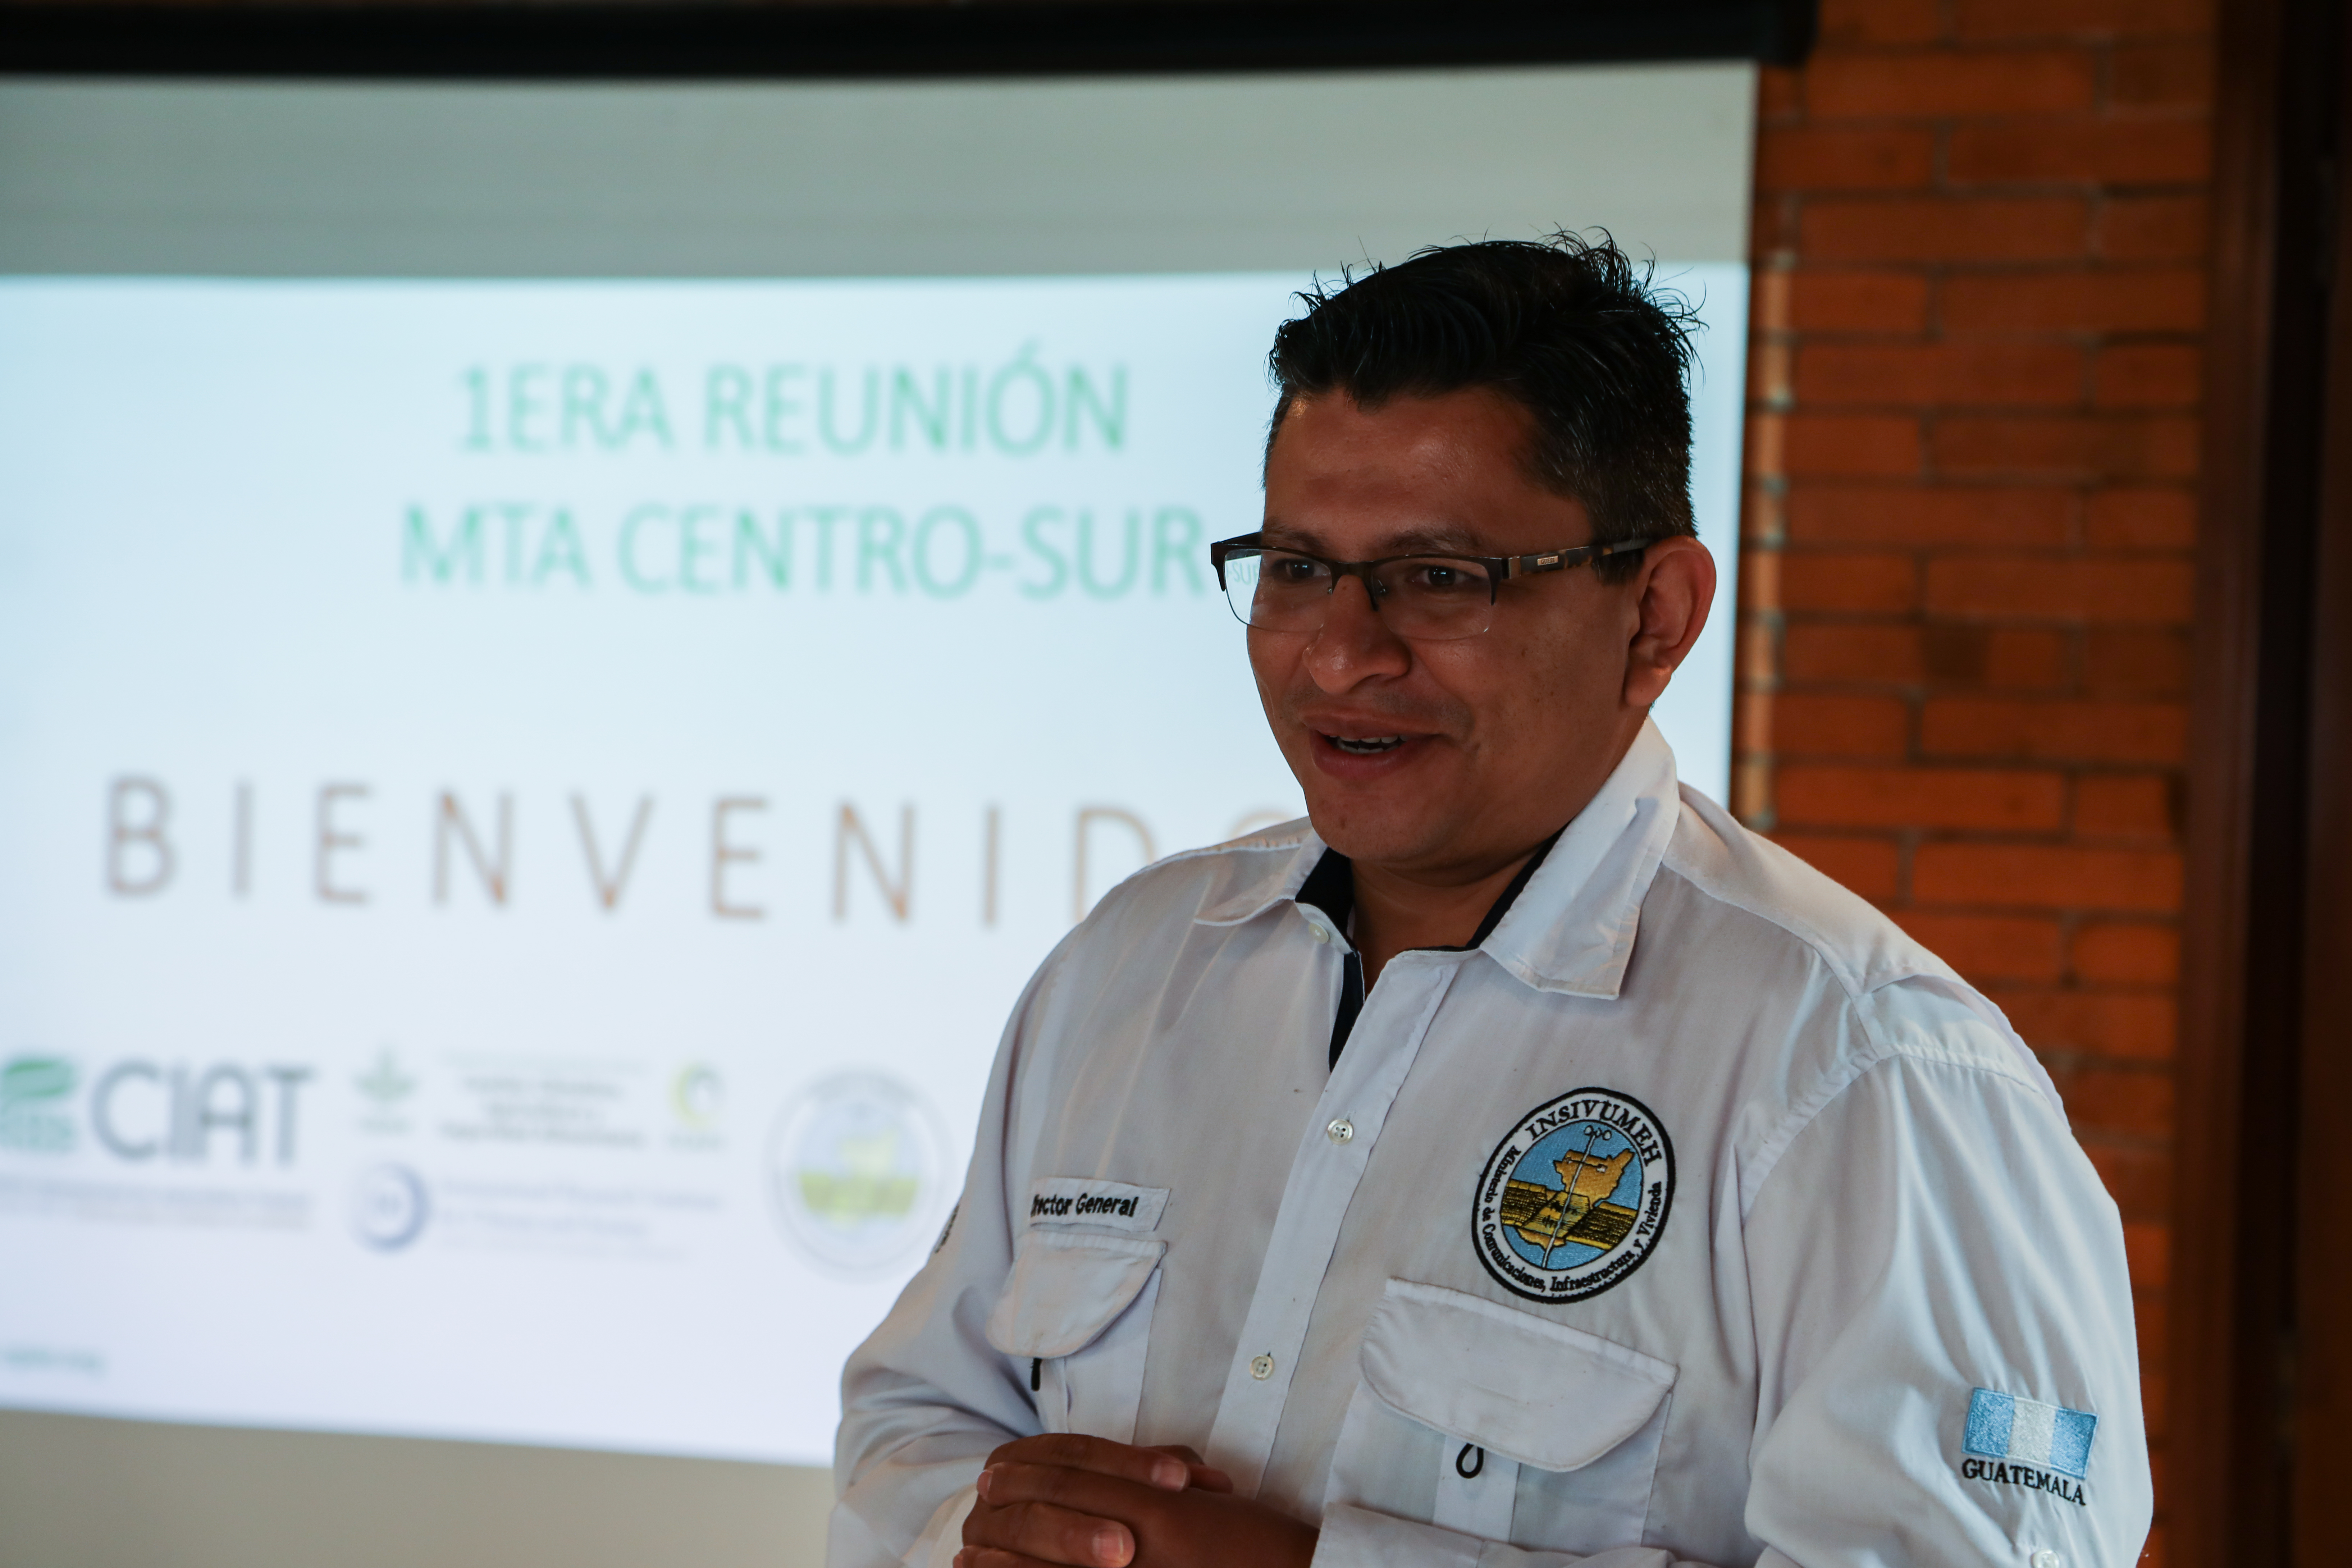 Juan Pablo Oliva Hernández, a Guatemalan man wearing glases and a button-up shirt with the INSIVUMEH logo, stands in front of a projector screen.